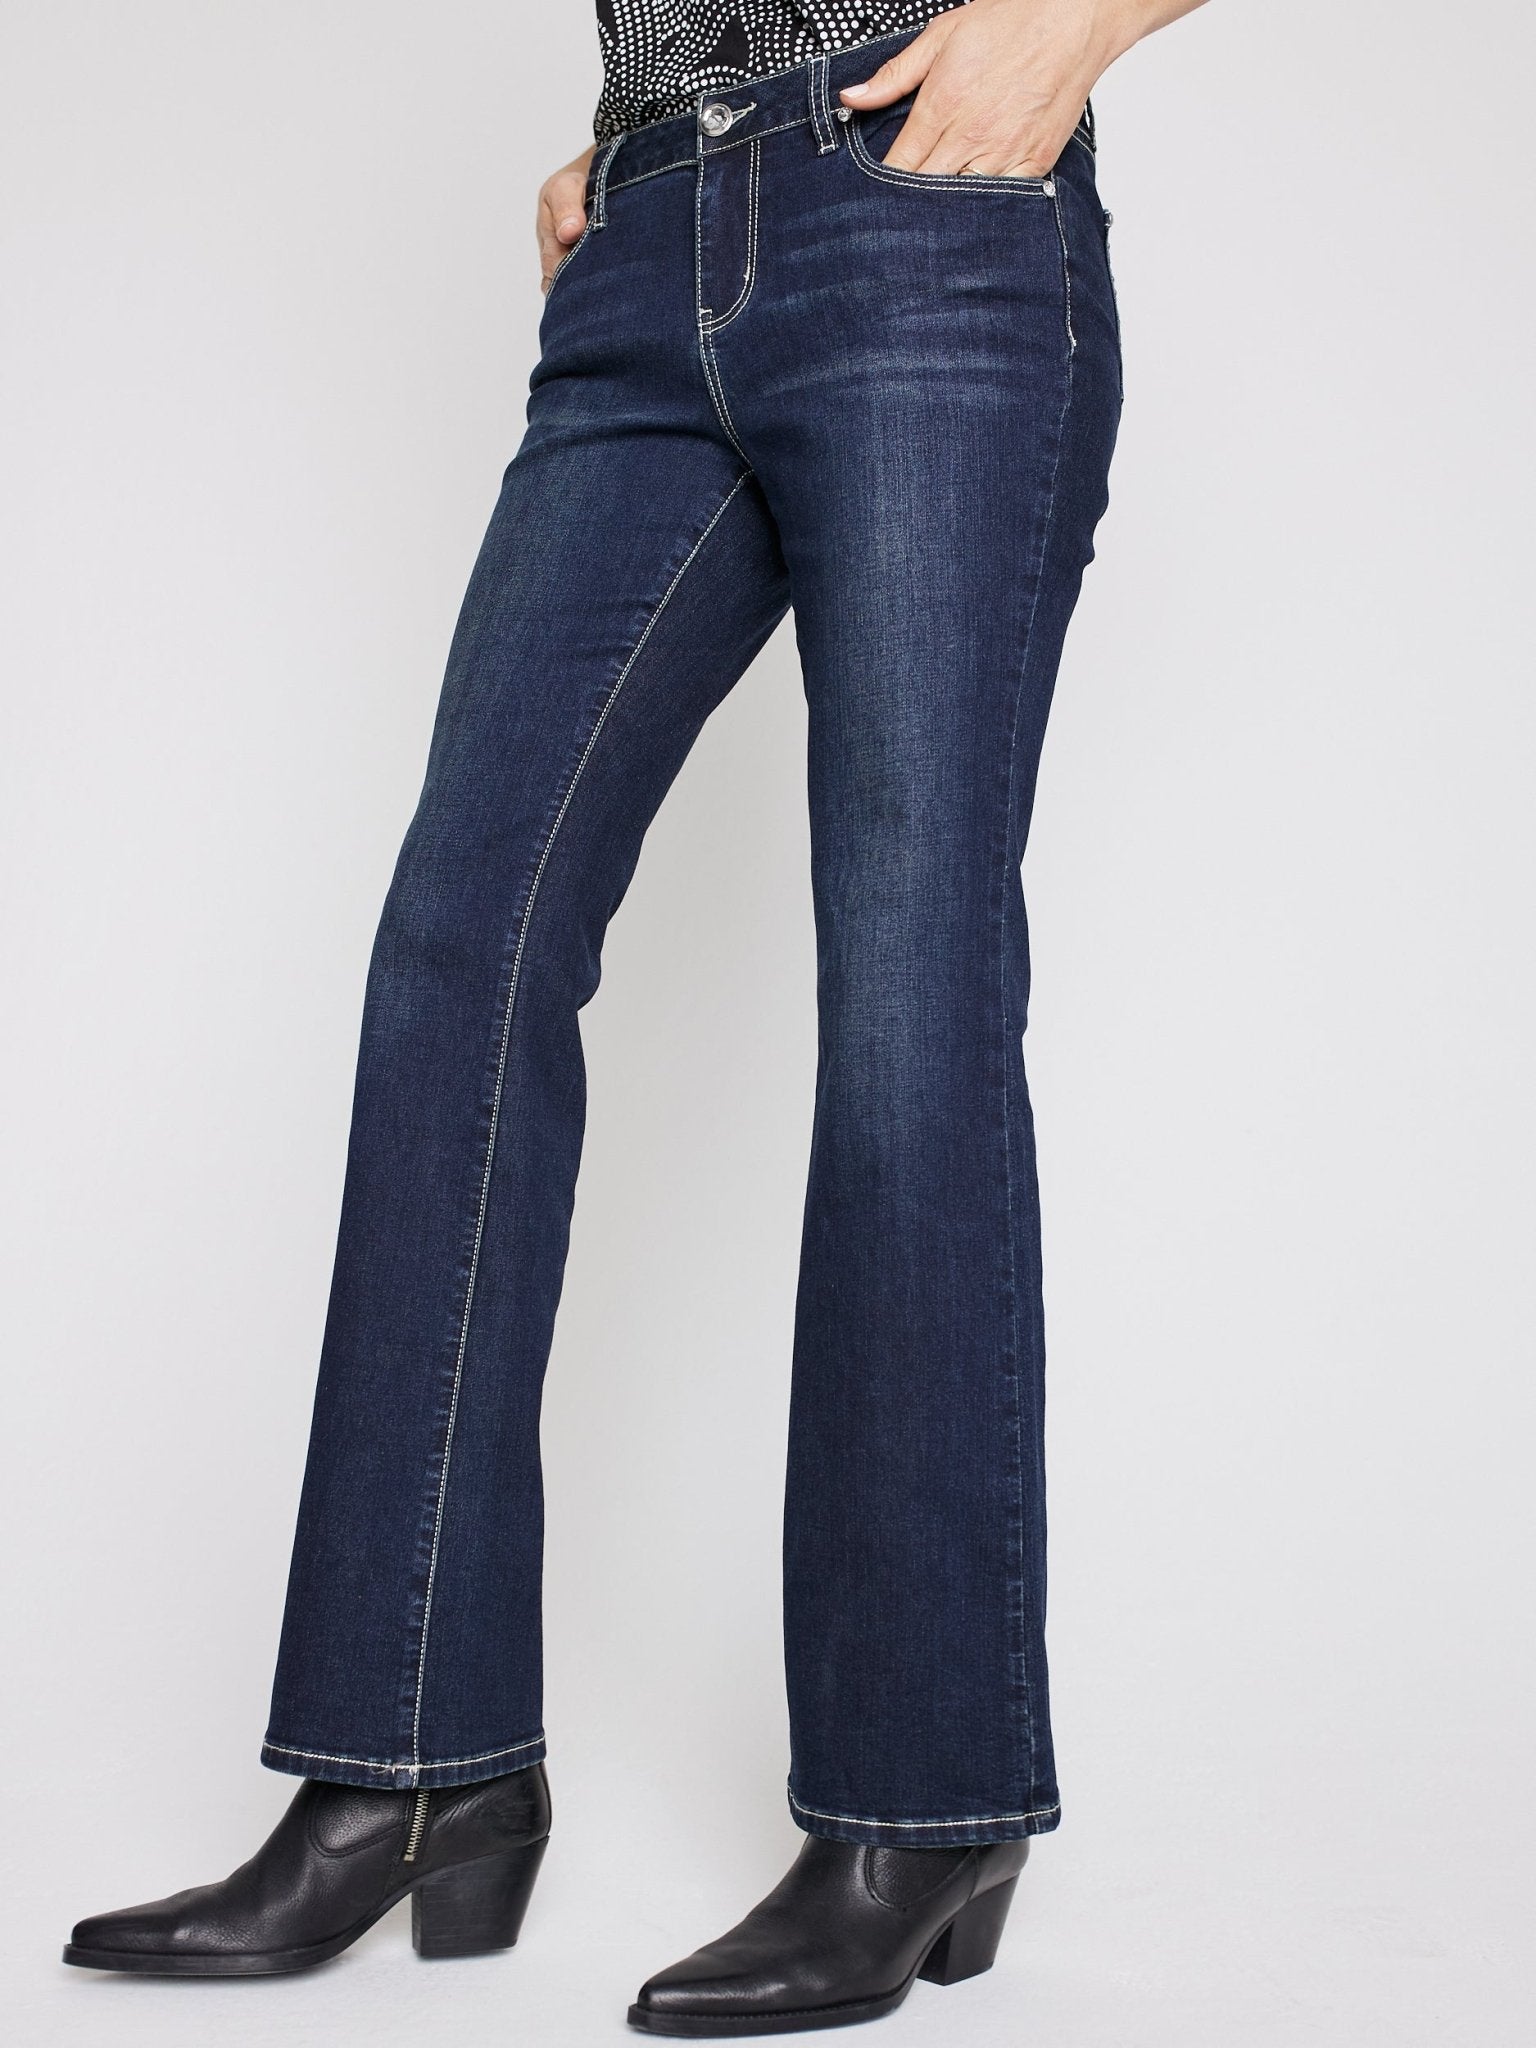 Westport Signature Bootcut Jeans with Bling Back Pocket - DressbarnClothing